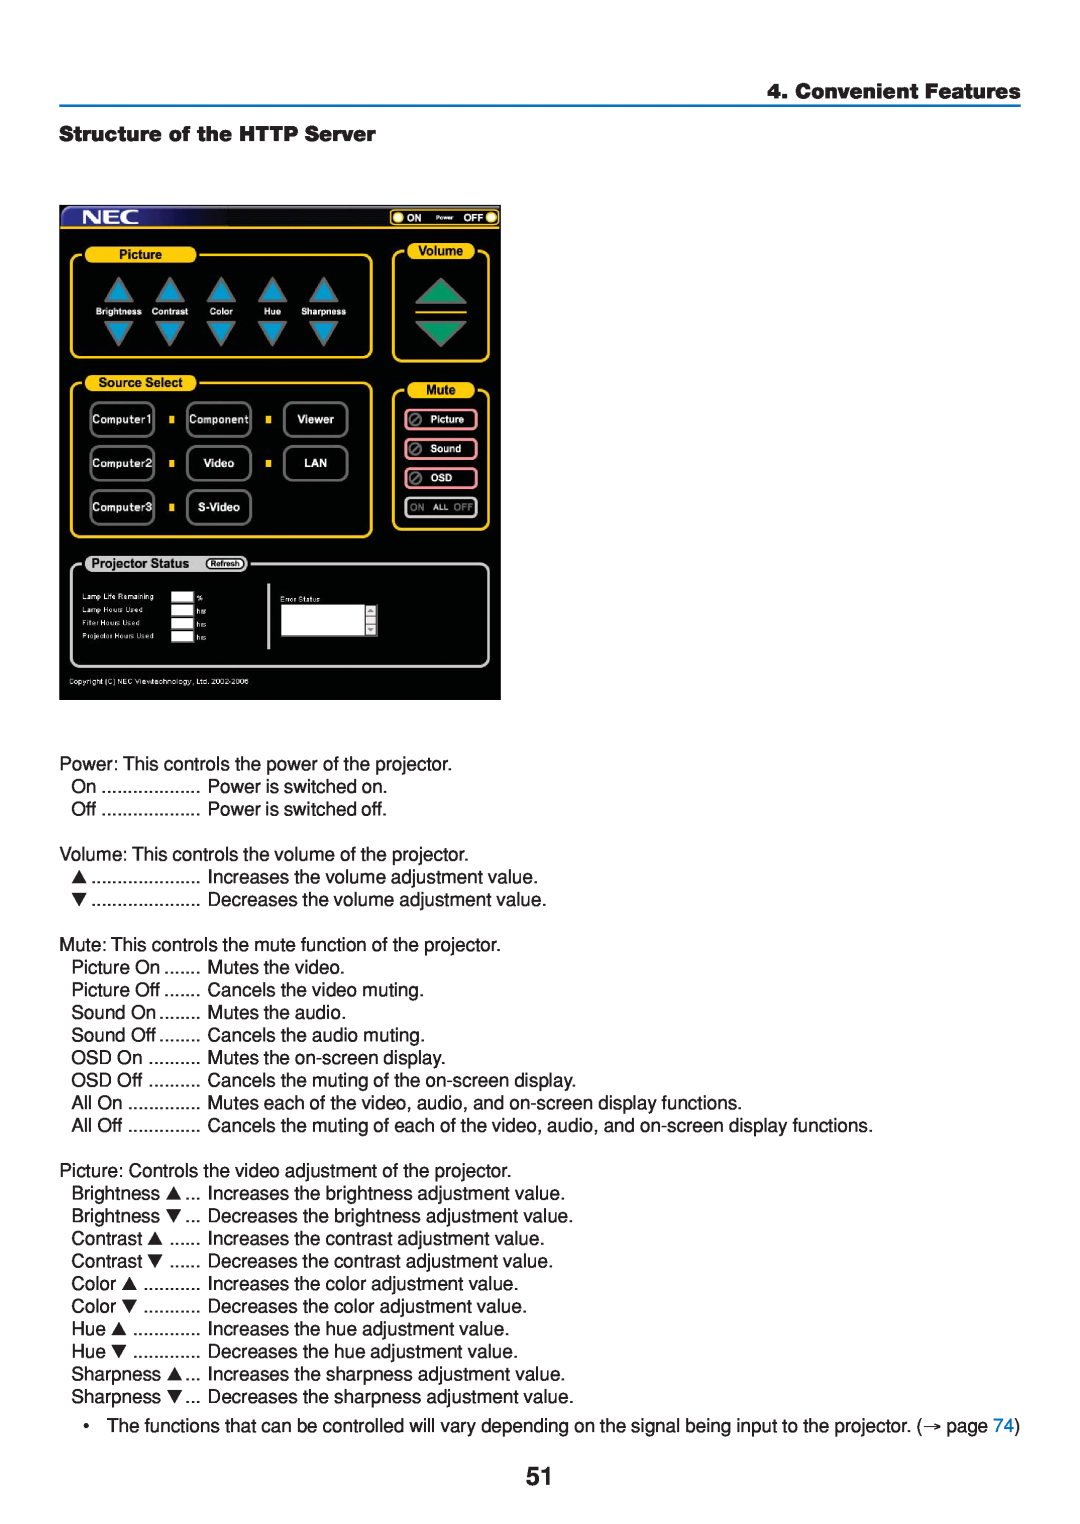 Dukane 8808 user manual Convenient Features Structure of the HTTP Server, OSD On 